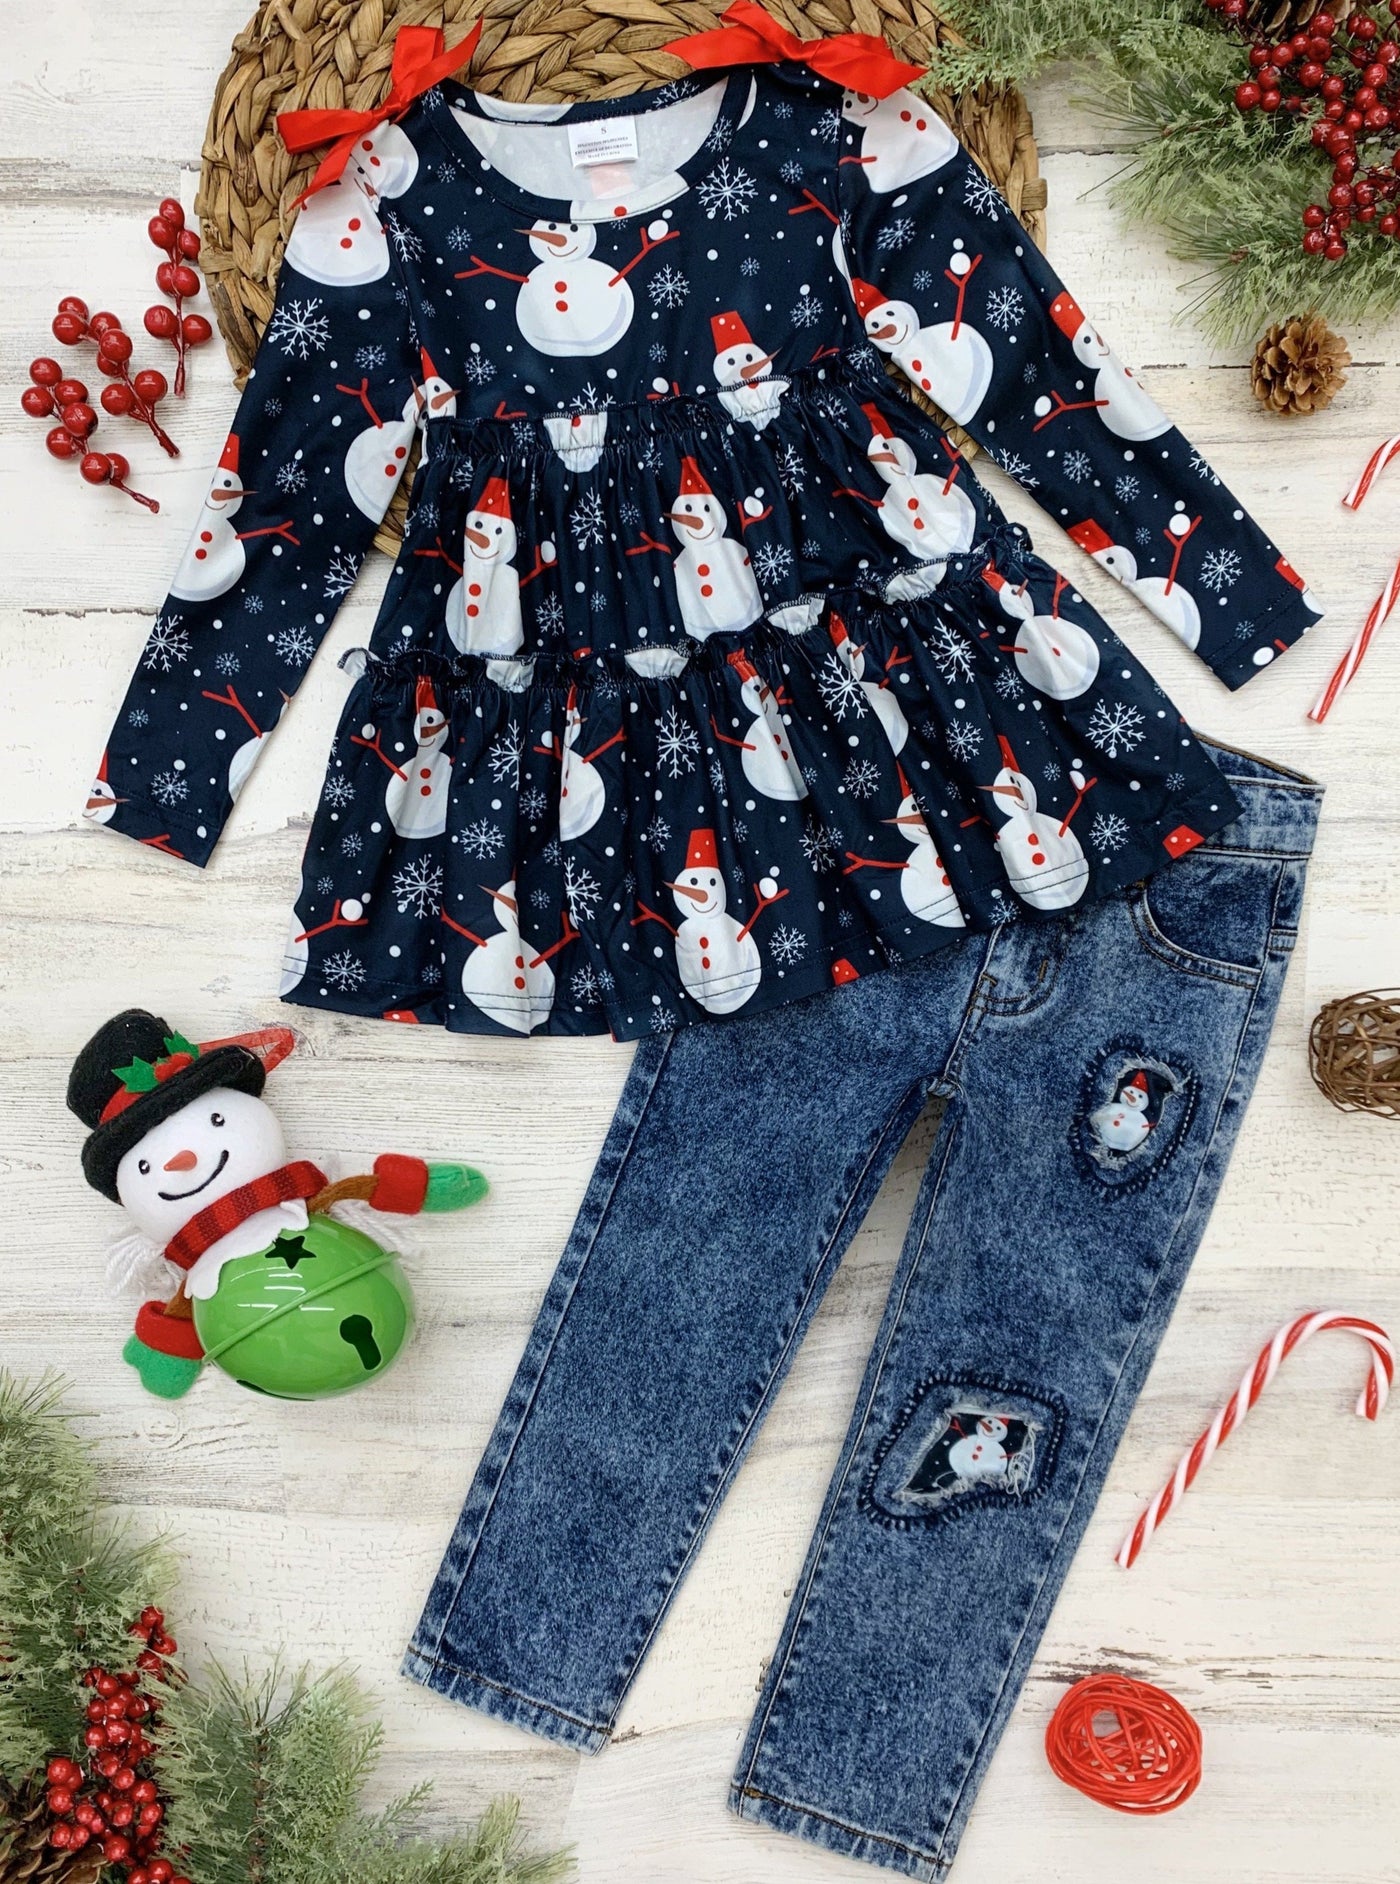 Cute Winter Sets | Girls Snowman Ruffled Top & Patched Jeans Set